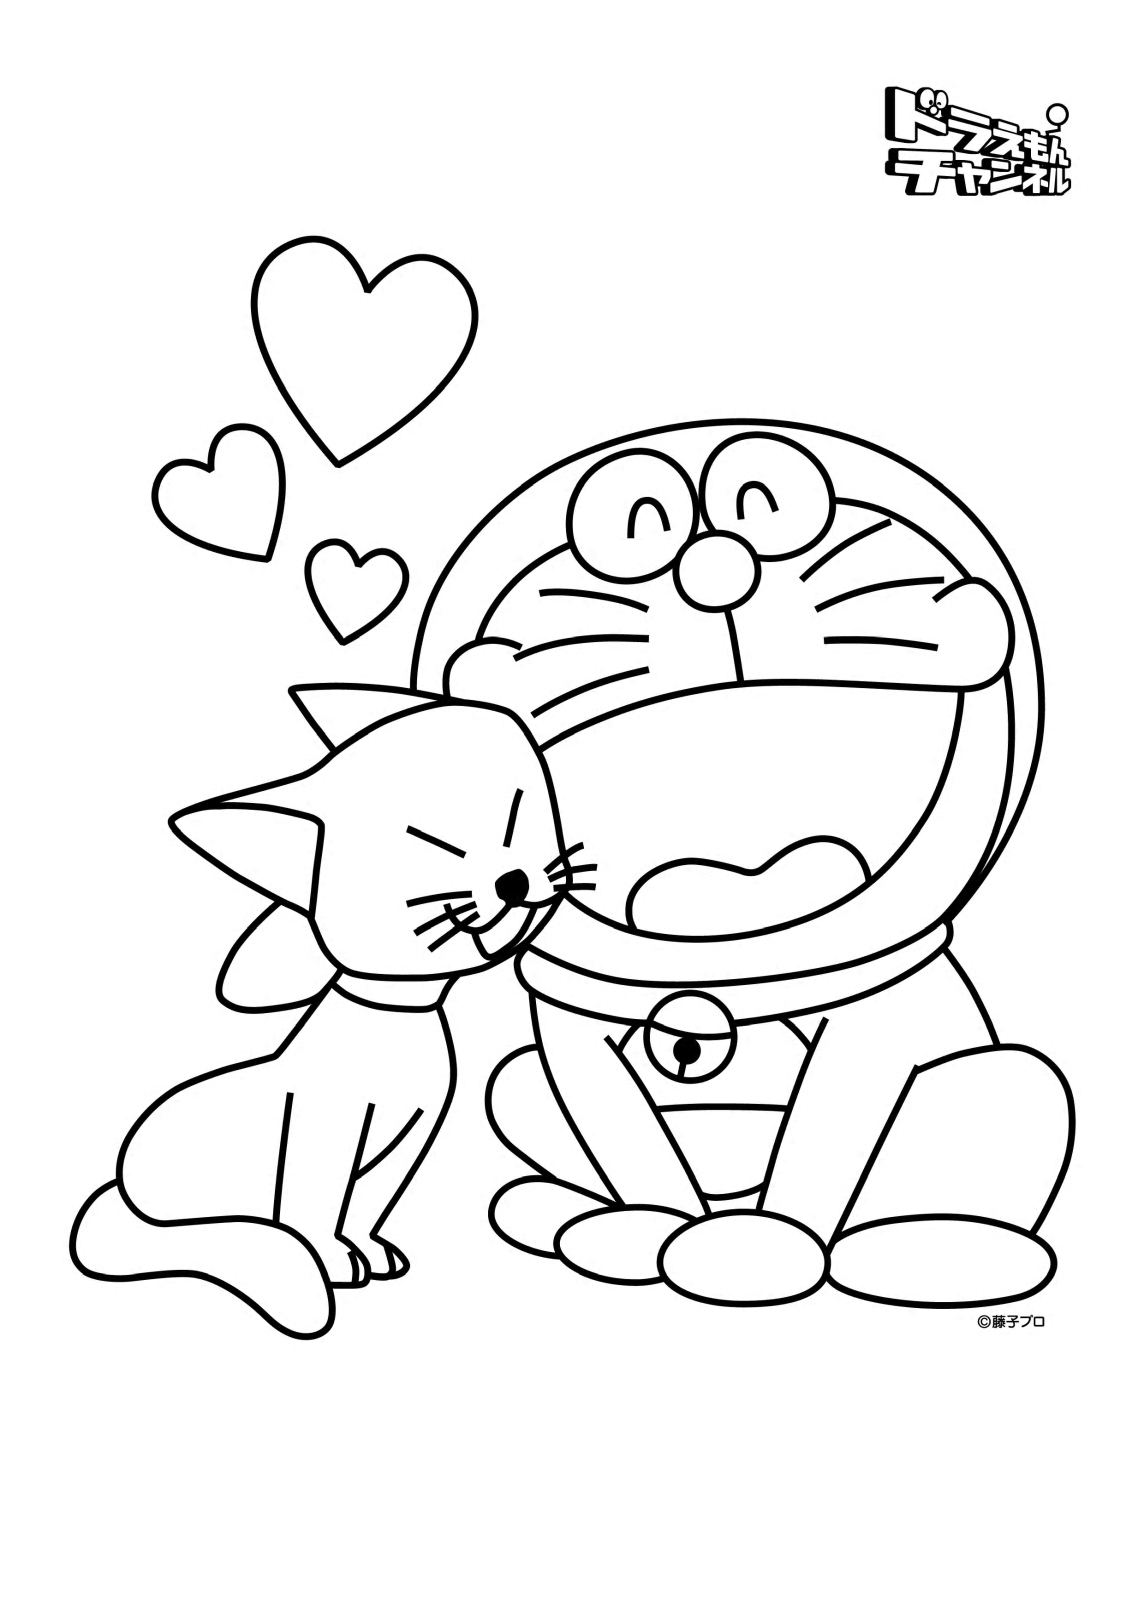 Doraemon and his girlfriend, Mimi Coloring Page